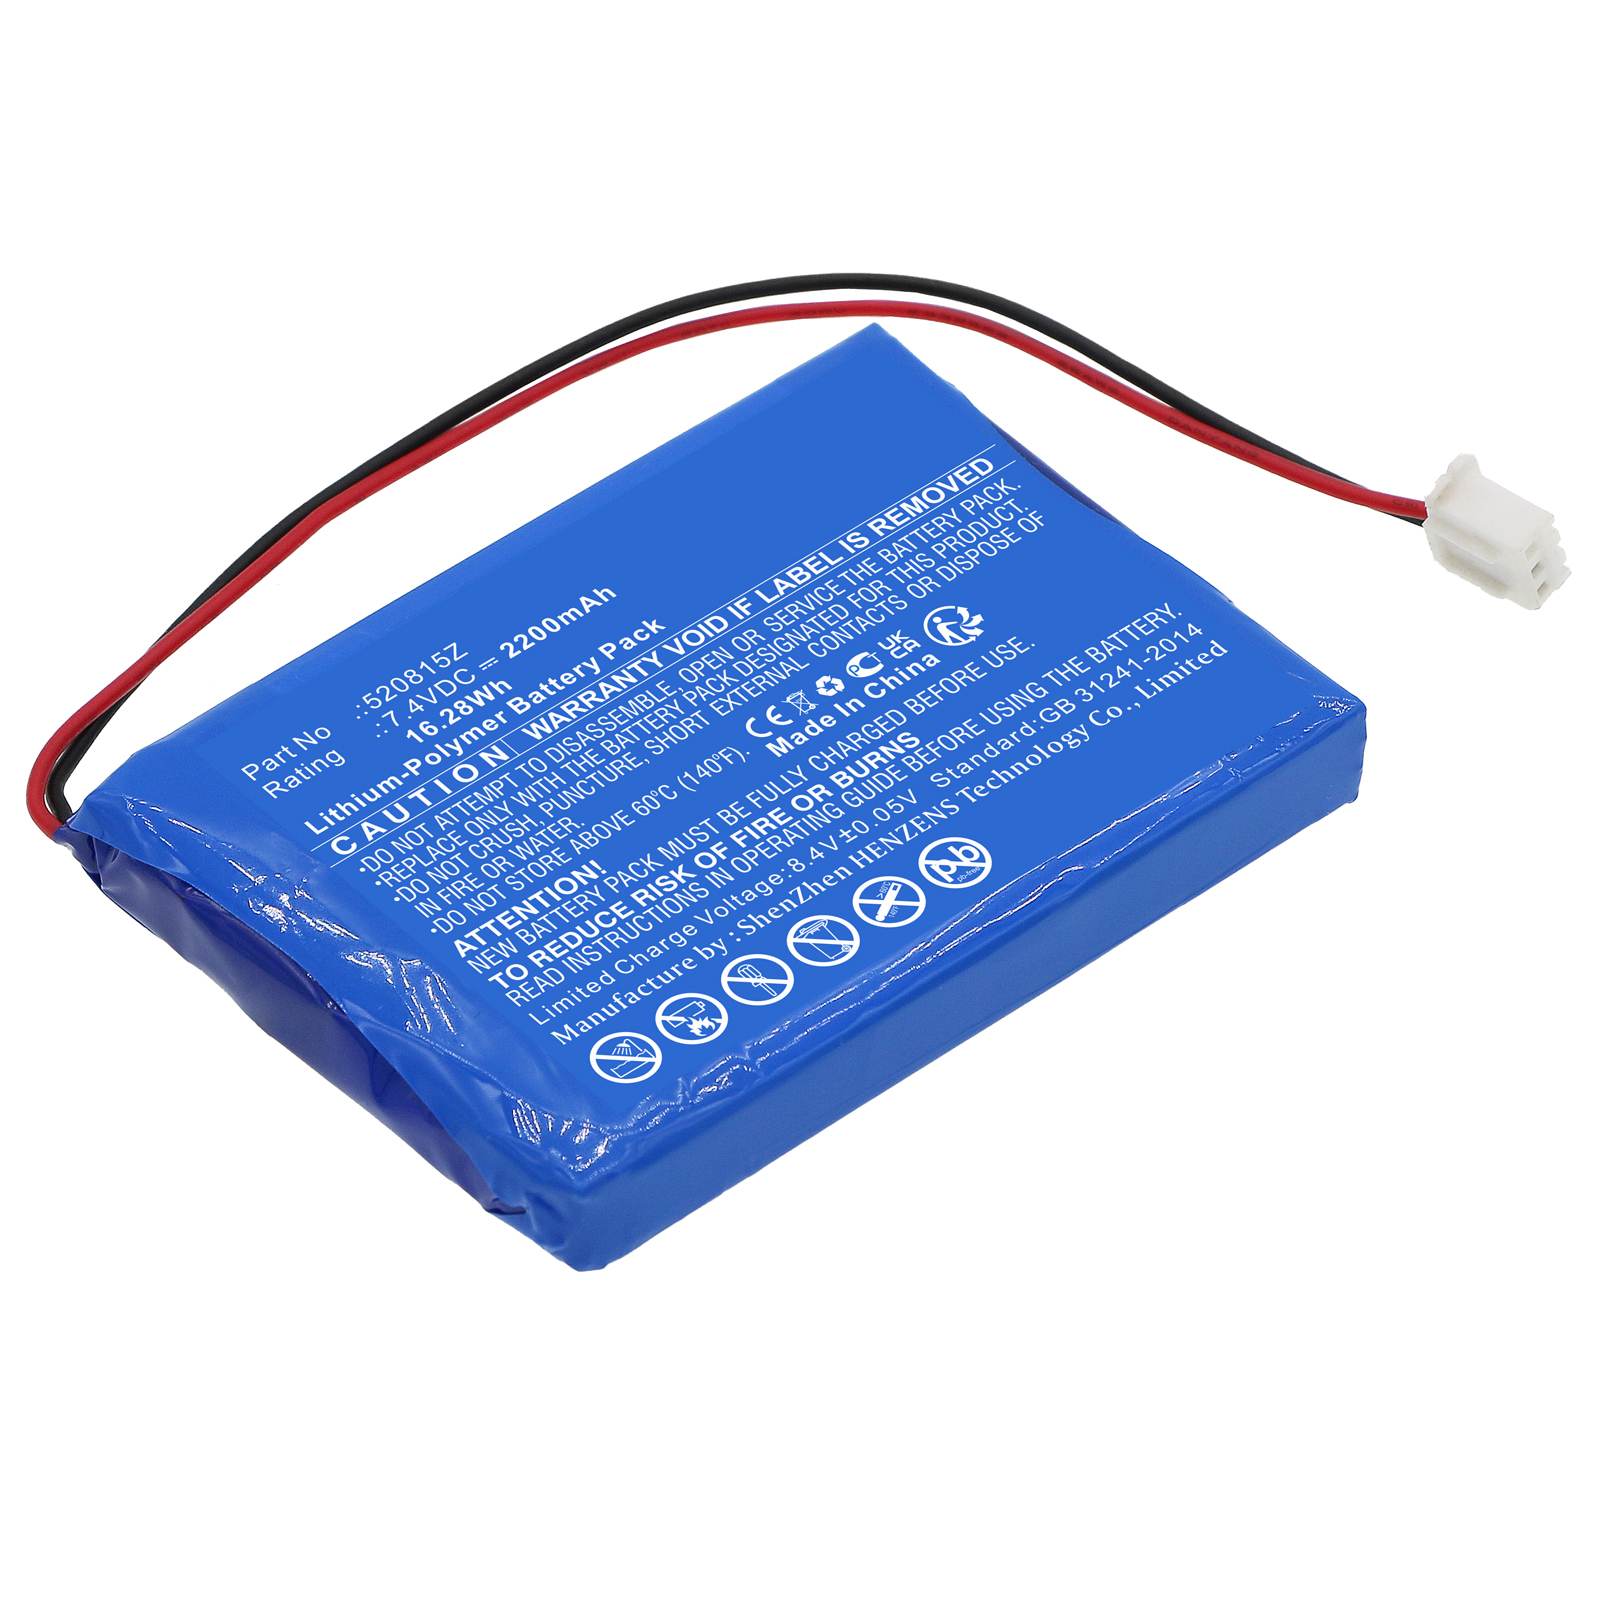 Batteries for PentairAlarm System